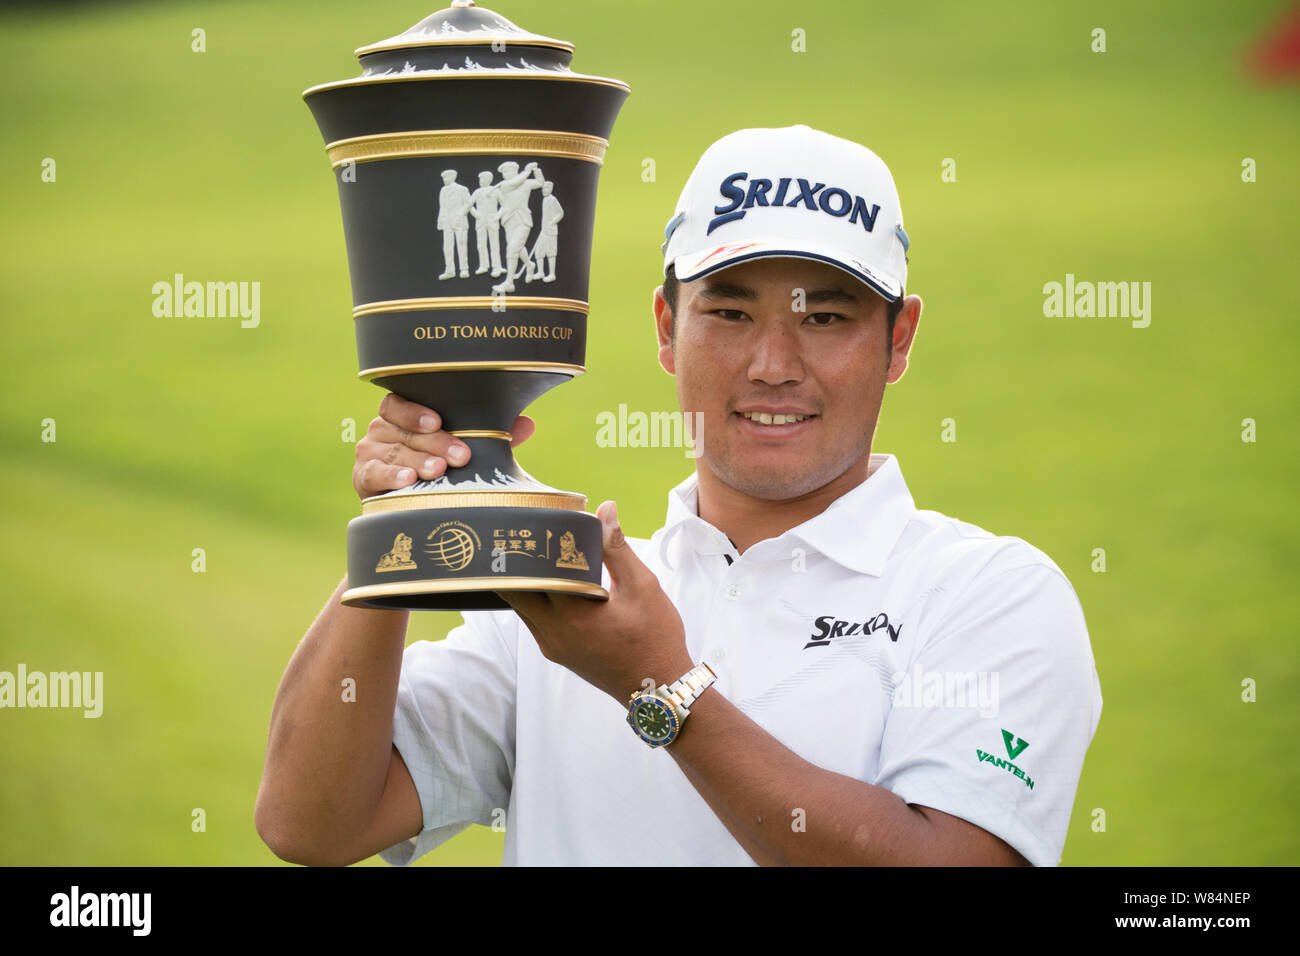 Hideki Matsuyama of Japan poses with his champion trophy after winning the 2016 WGC-HSBC Champions golf tournament in Shanghai, China, 30 October 2016 Stock Photo